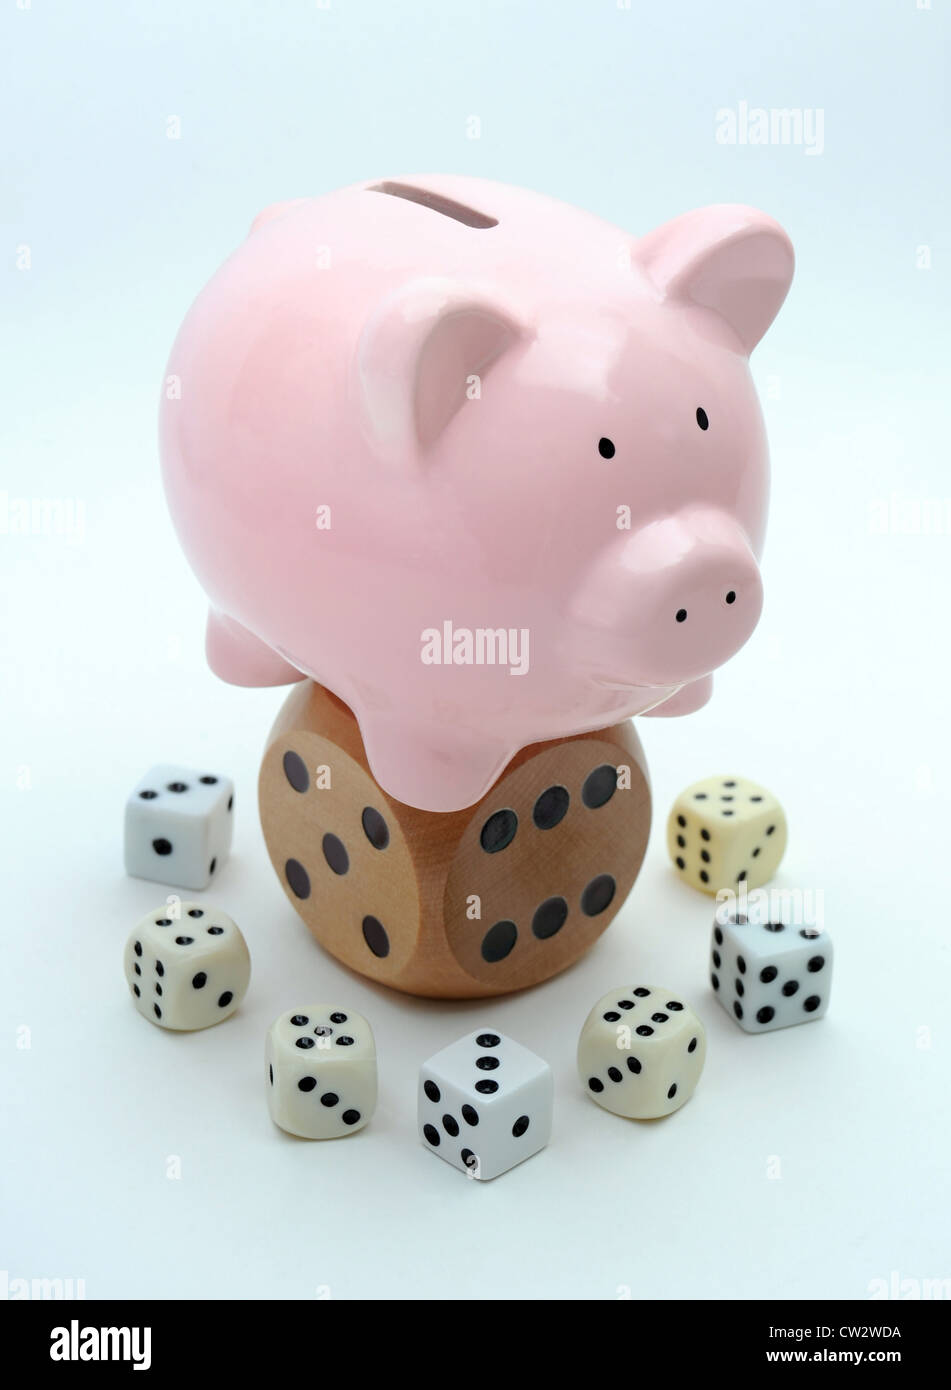 PIGGYBANK ON DICE RE WAGES GROWTH THE ECONOMY INCOMES RECESSION SALARY SALARIES HOUSEHOLD BUDGETS INFLATION SAVINGS GAMBLING UK Stock Photo